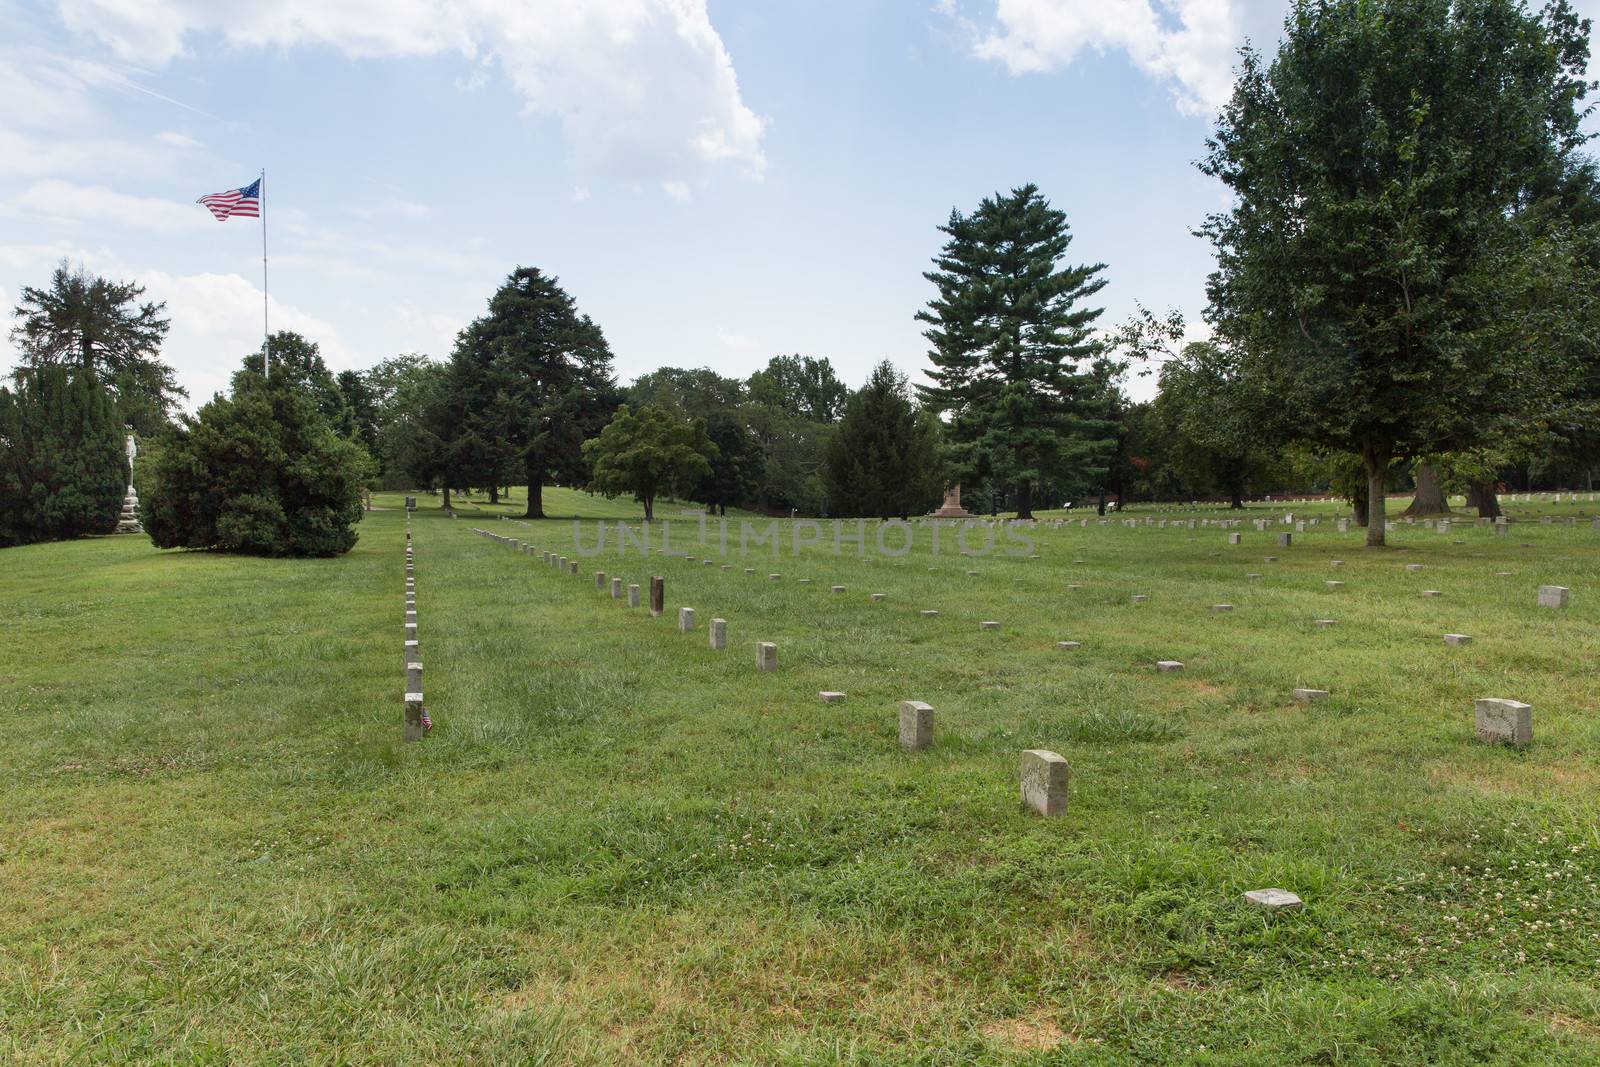 This is the burial ground for Union soldiers that fell in the several Civil War battles in the area. There is a separate Confederate Cemetary.